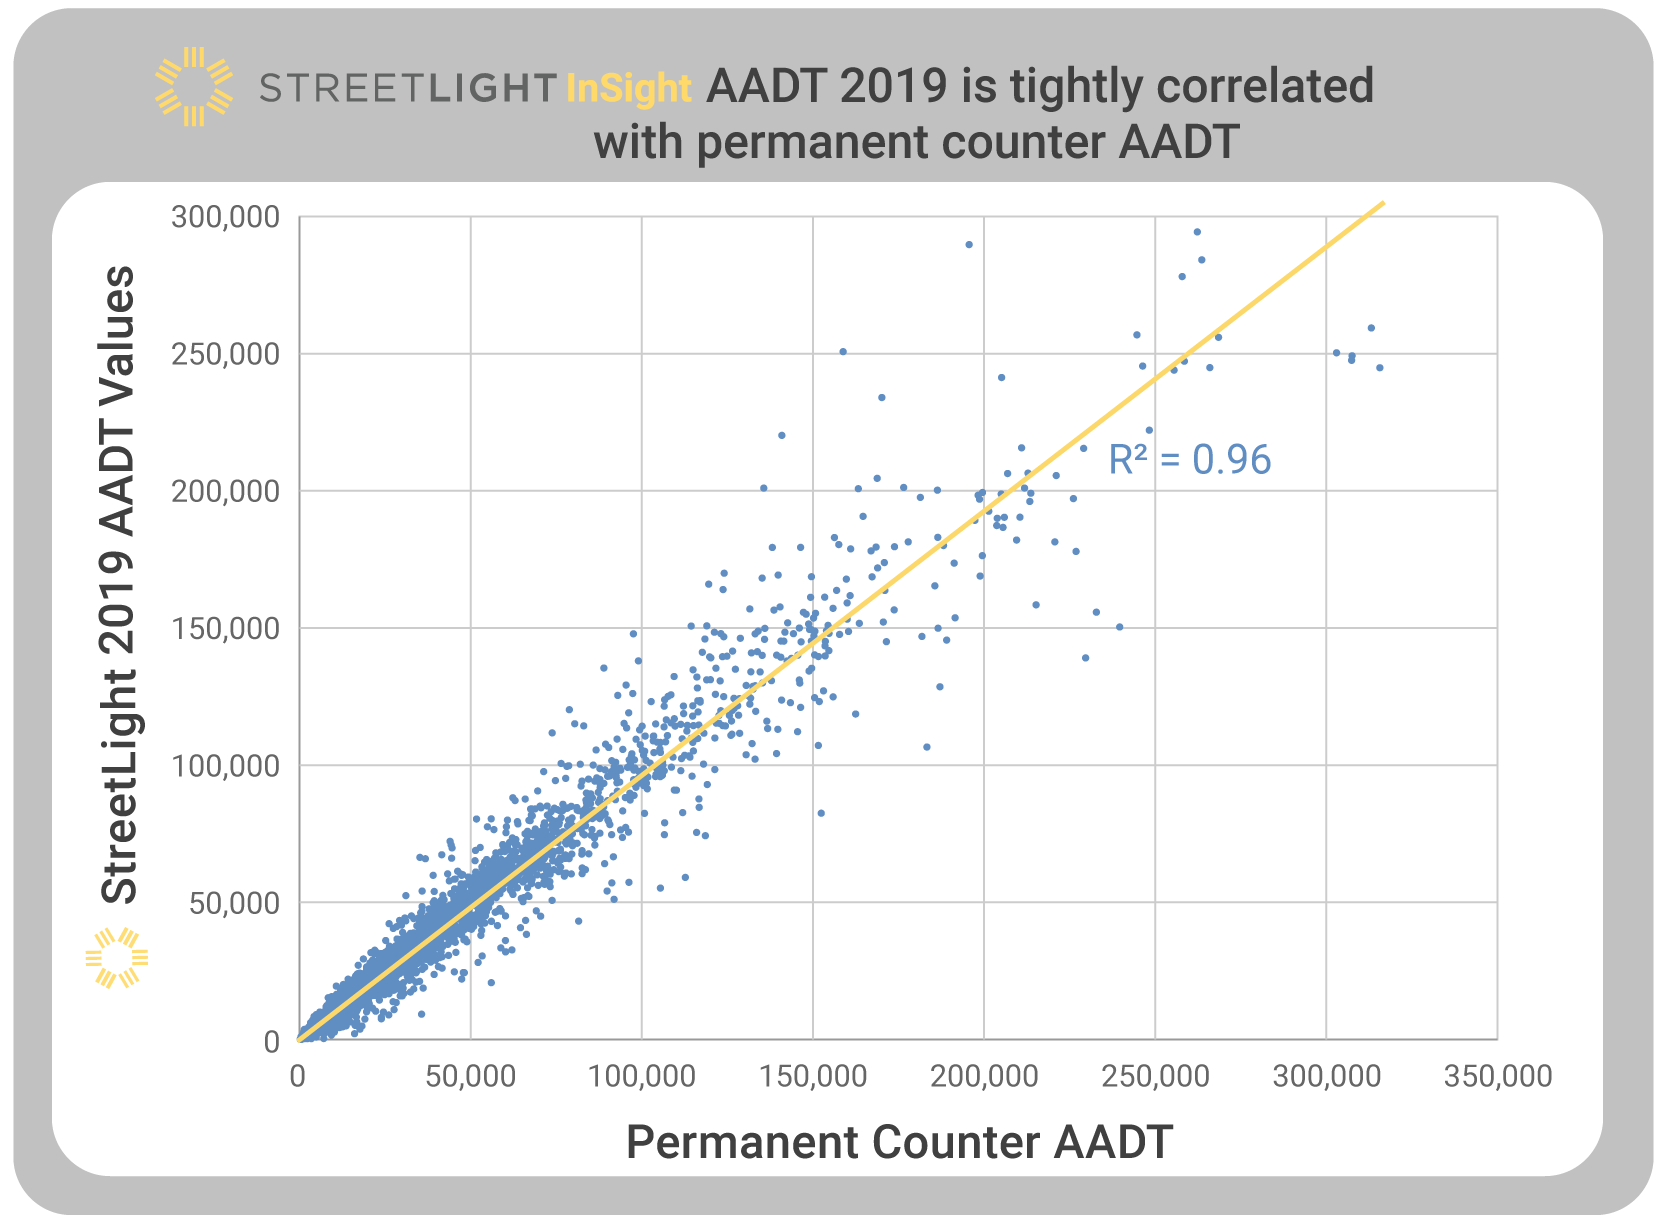 StreetLight 2019 AADT for test data compared to permanent counter AADT at 6,000+ locations across the U.S.; R2 is 0.96.